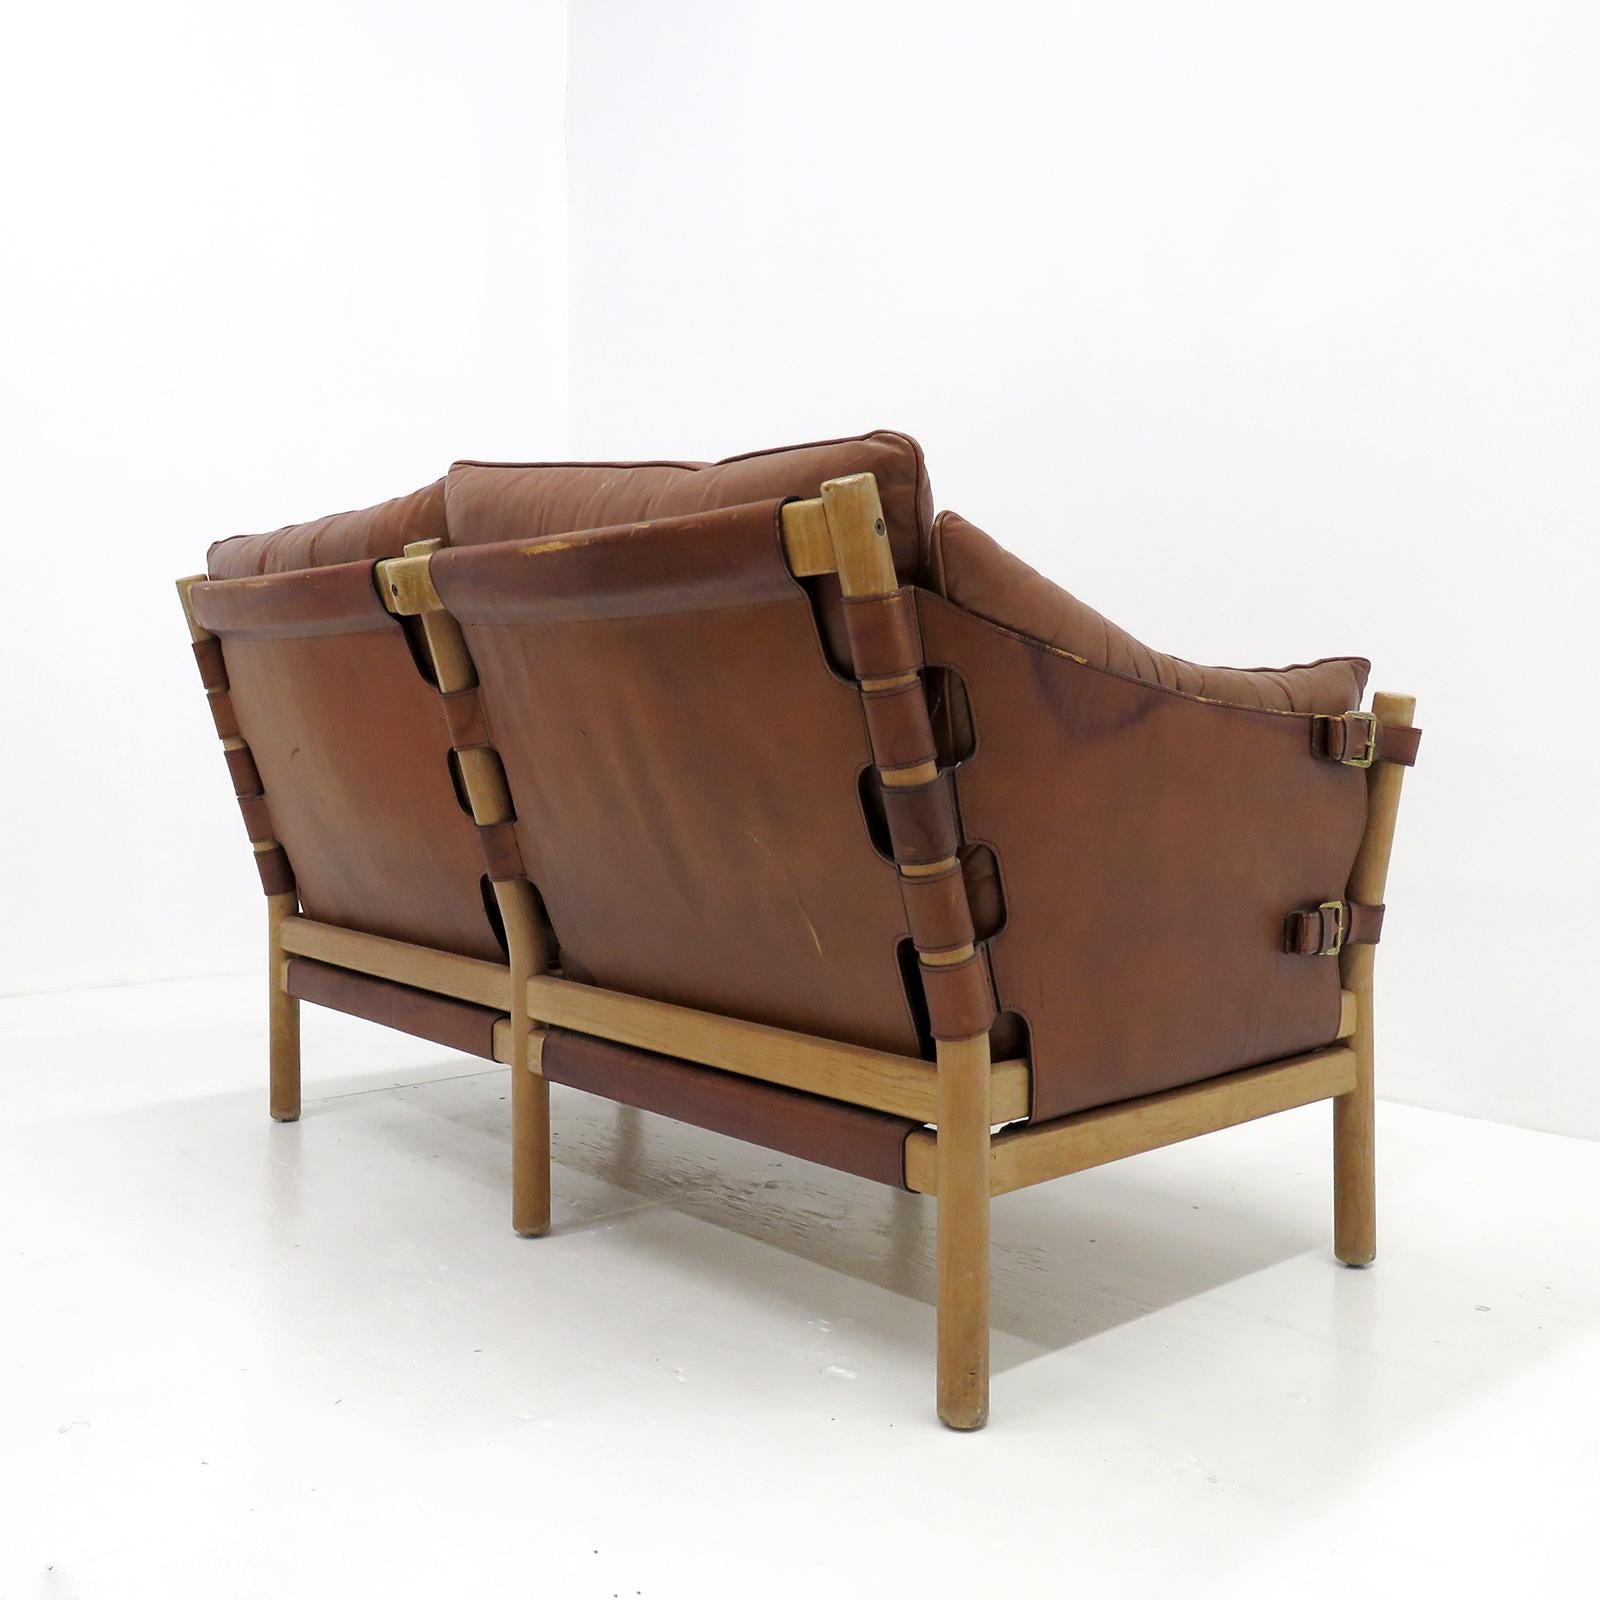 Leather Settee Model ‘Ilona’ by Arne Norell, 1960 For Sale 1